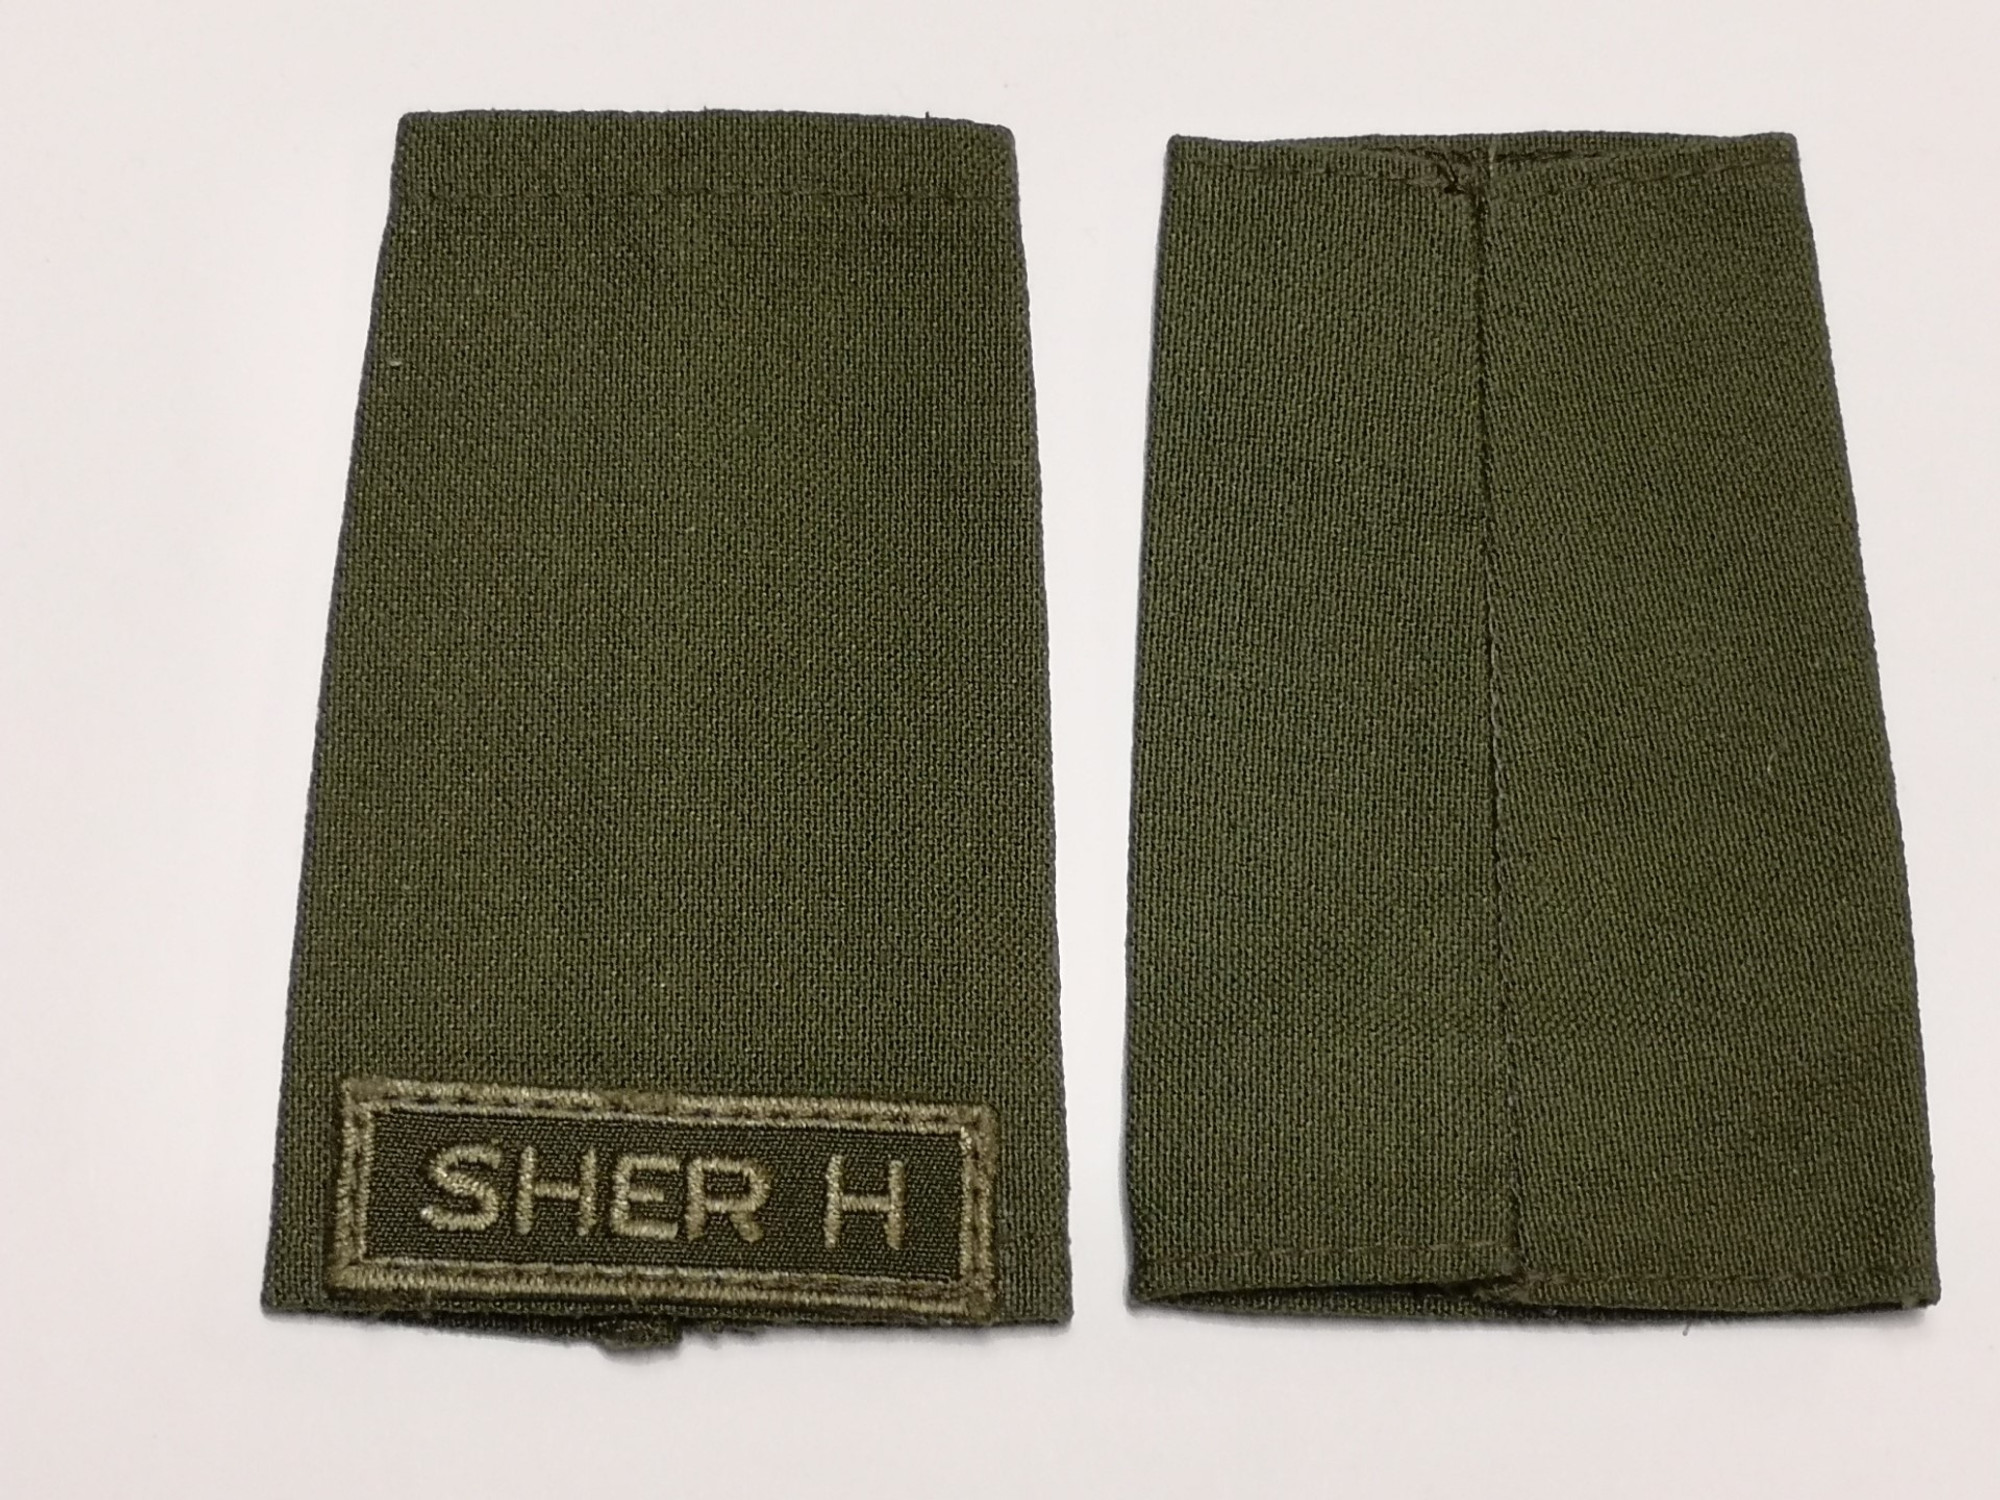 Canadian Armed Forces Green Rank Epaulets SHER H - Private (Basic)